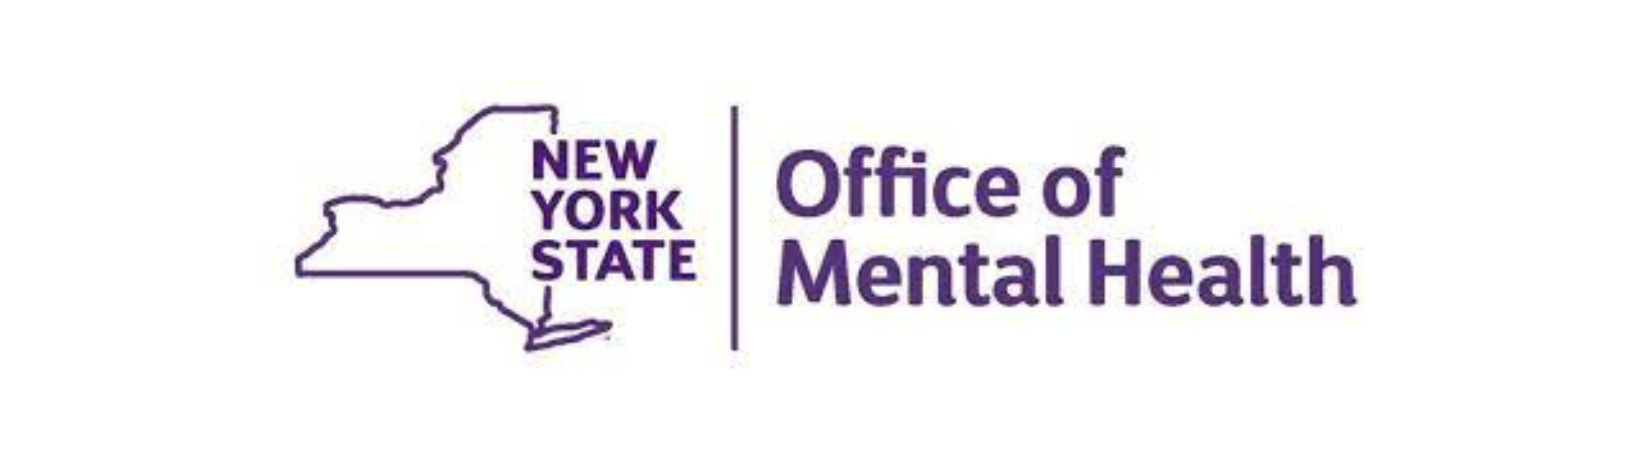 NYS Office of Mental Health logo